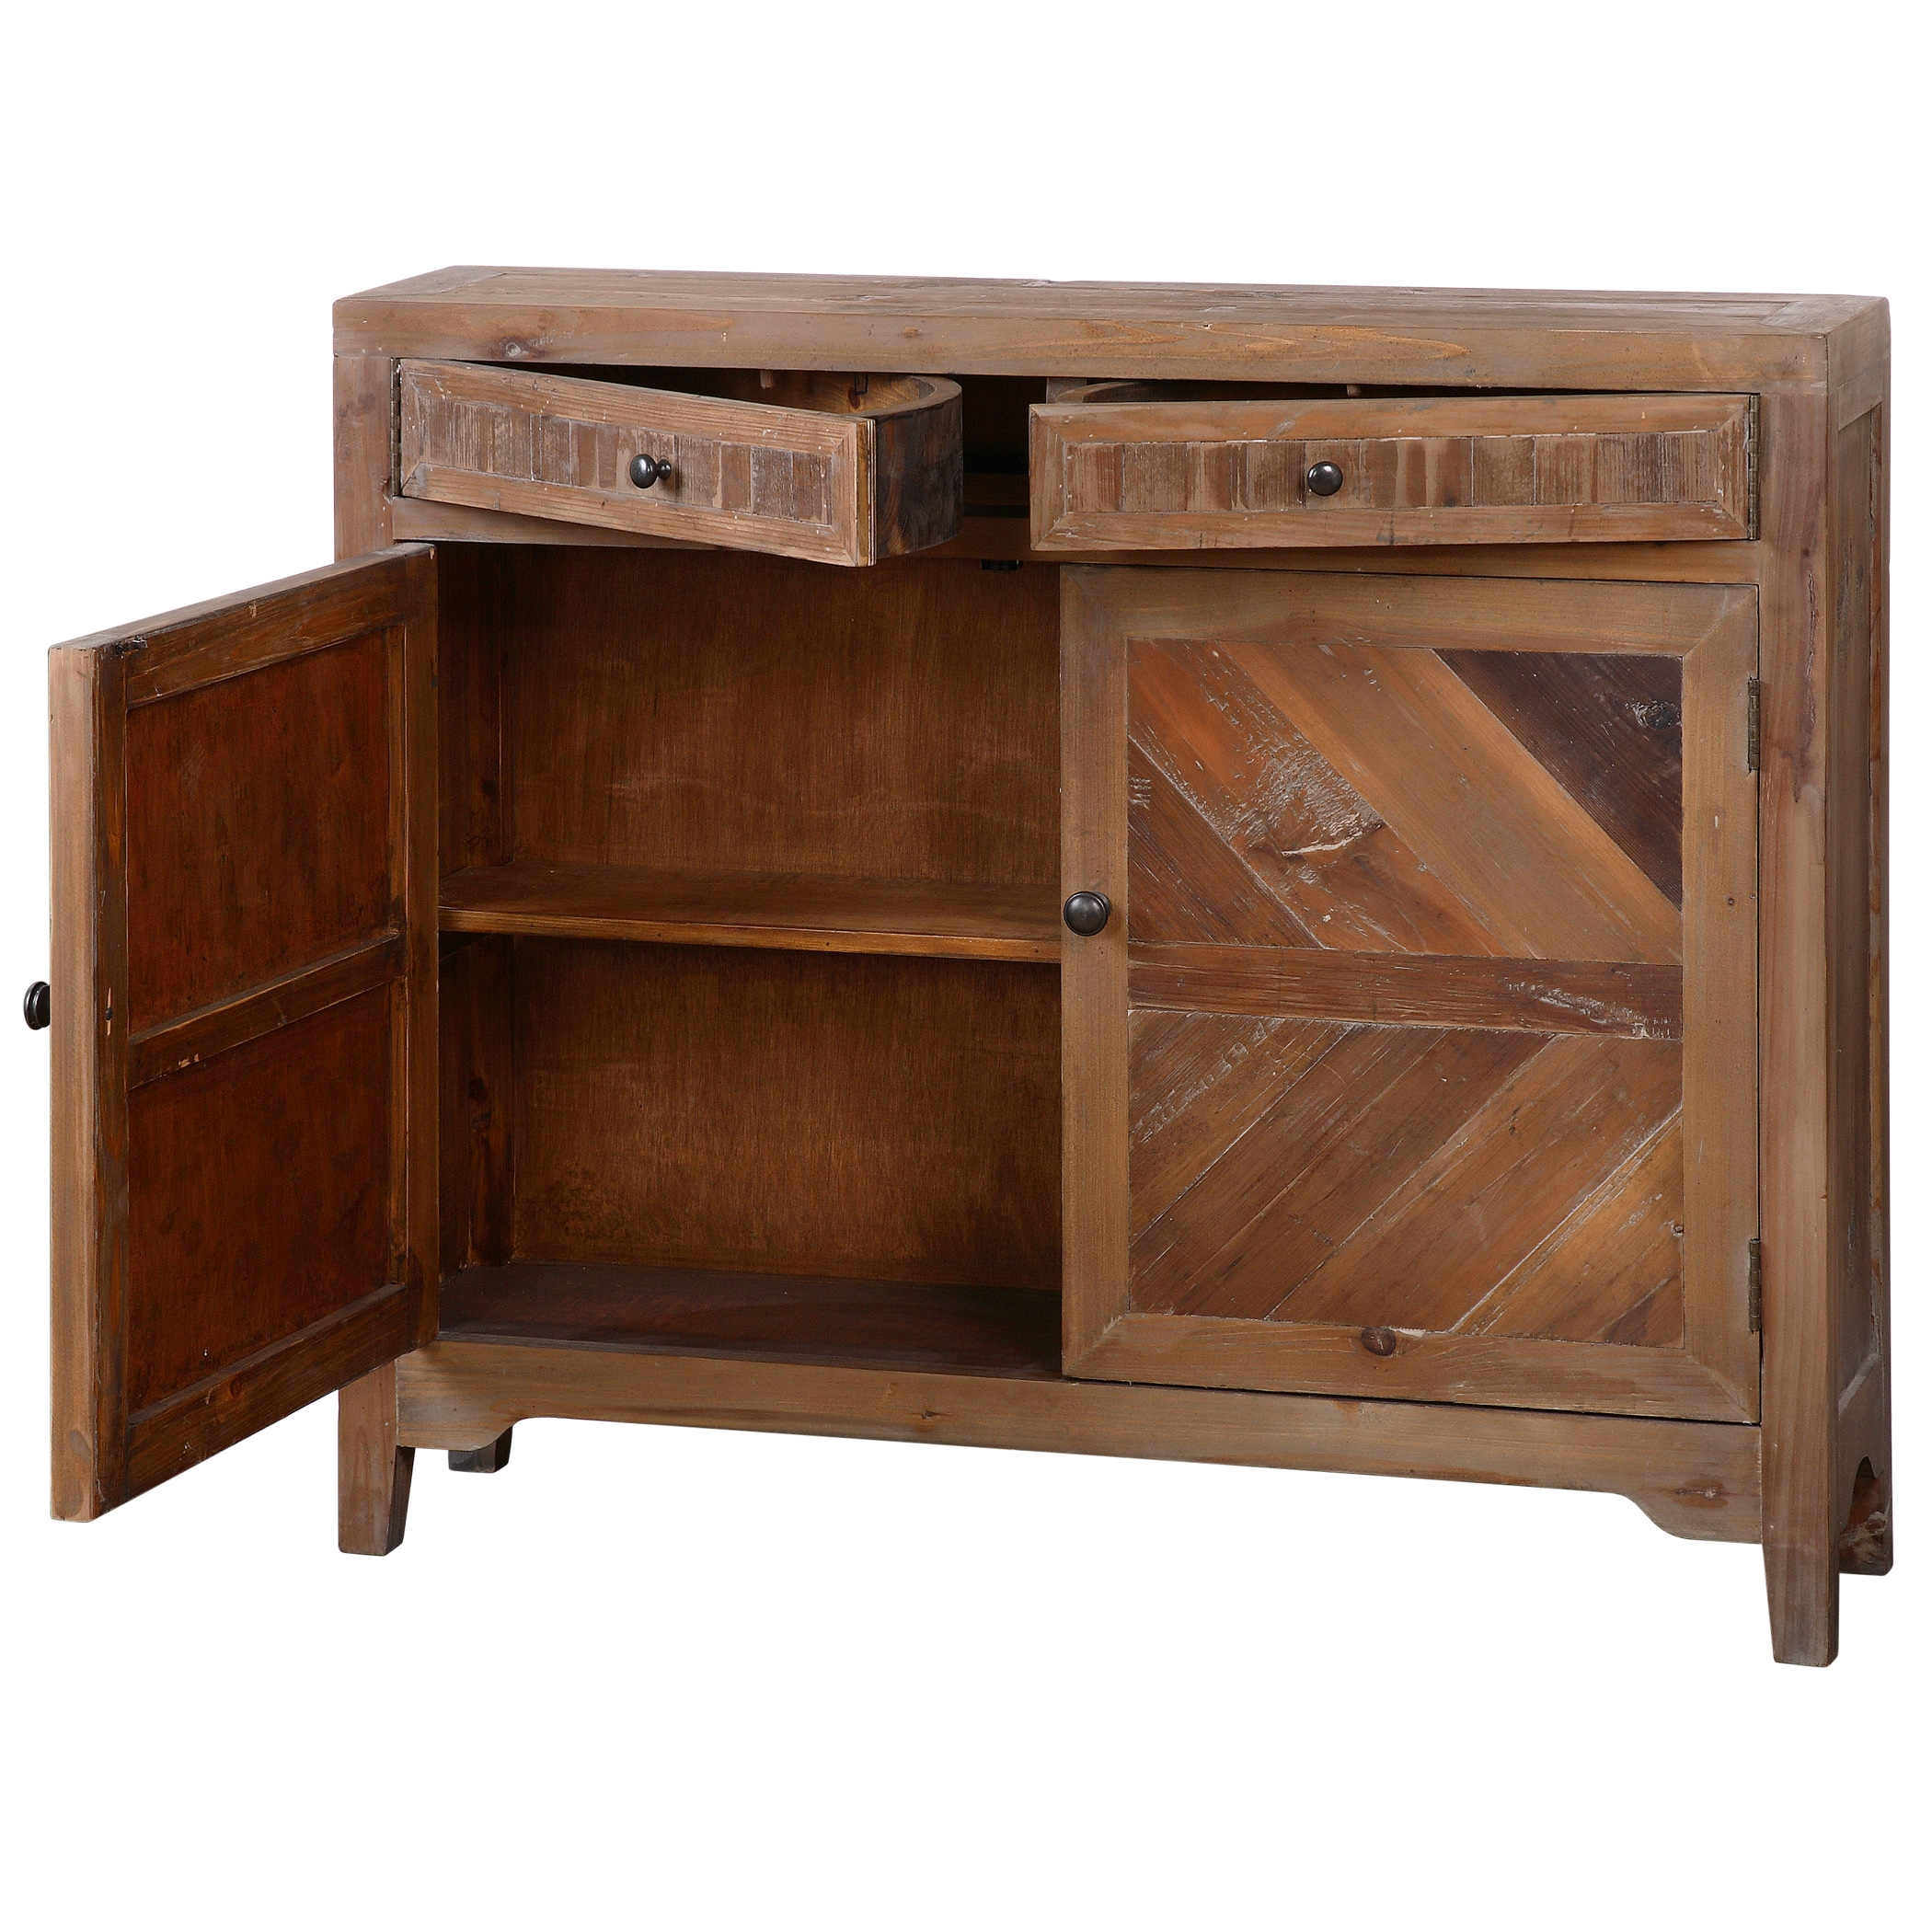 Hesperos Reclaimed Wood Console Cabinet - Image 2